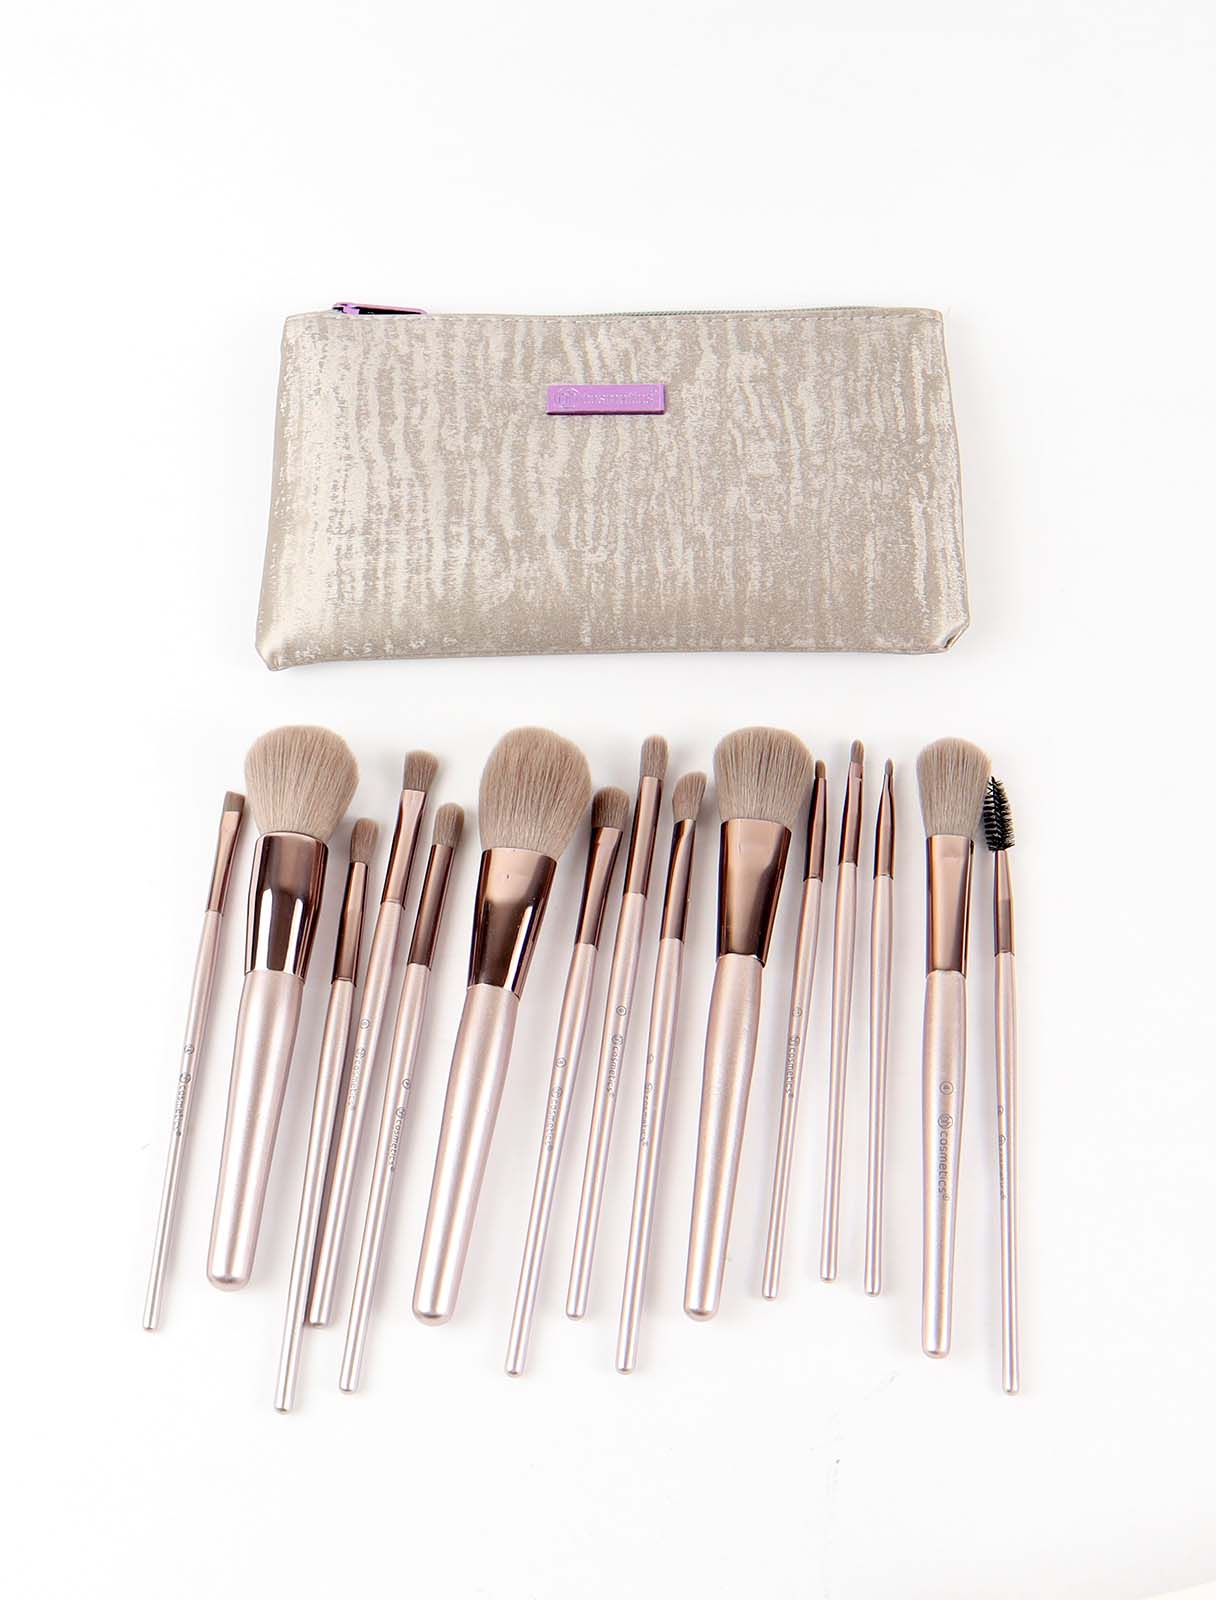 15-piece makeup brush set with leather case